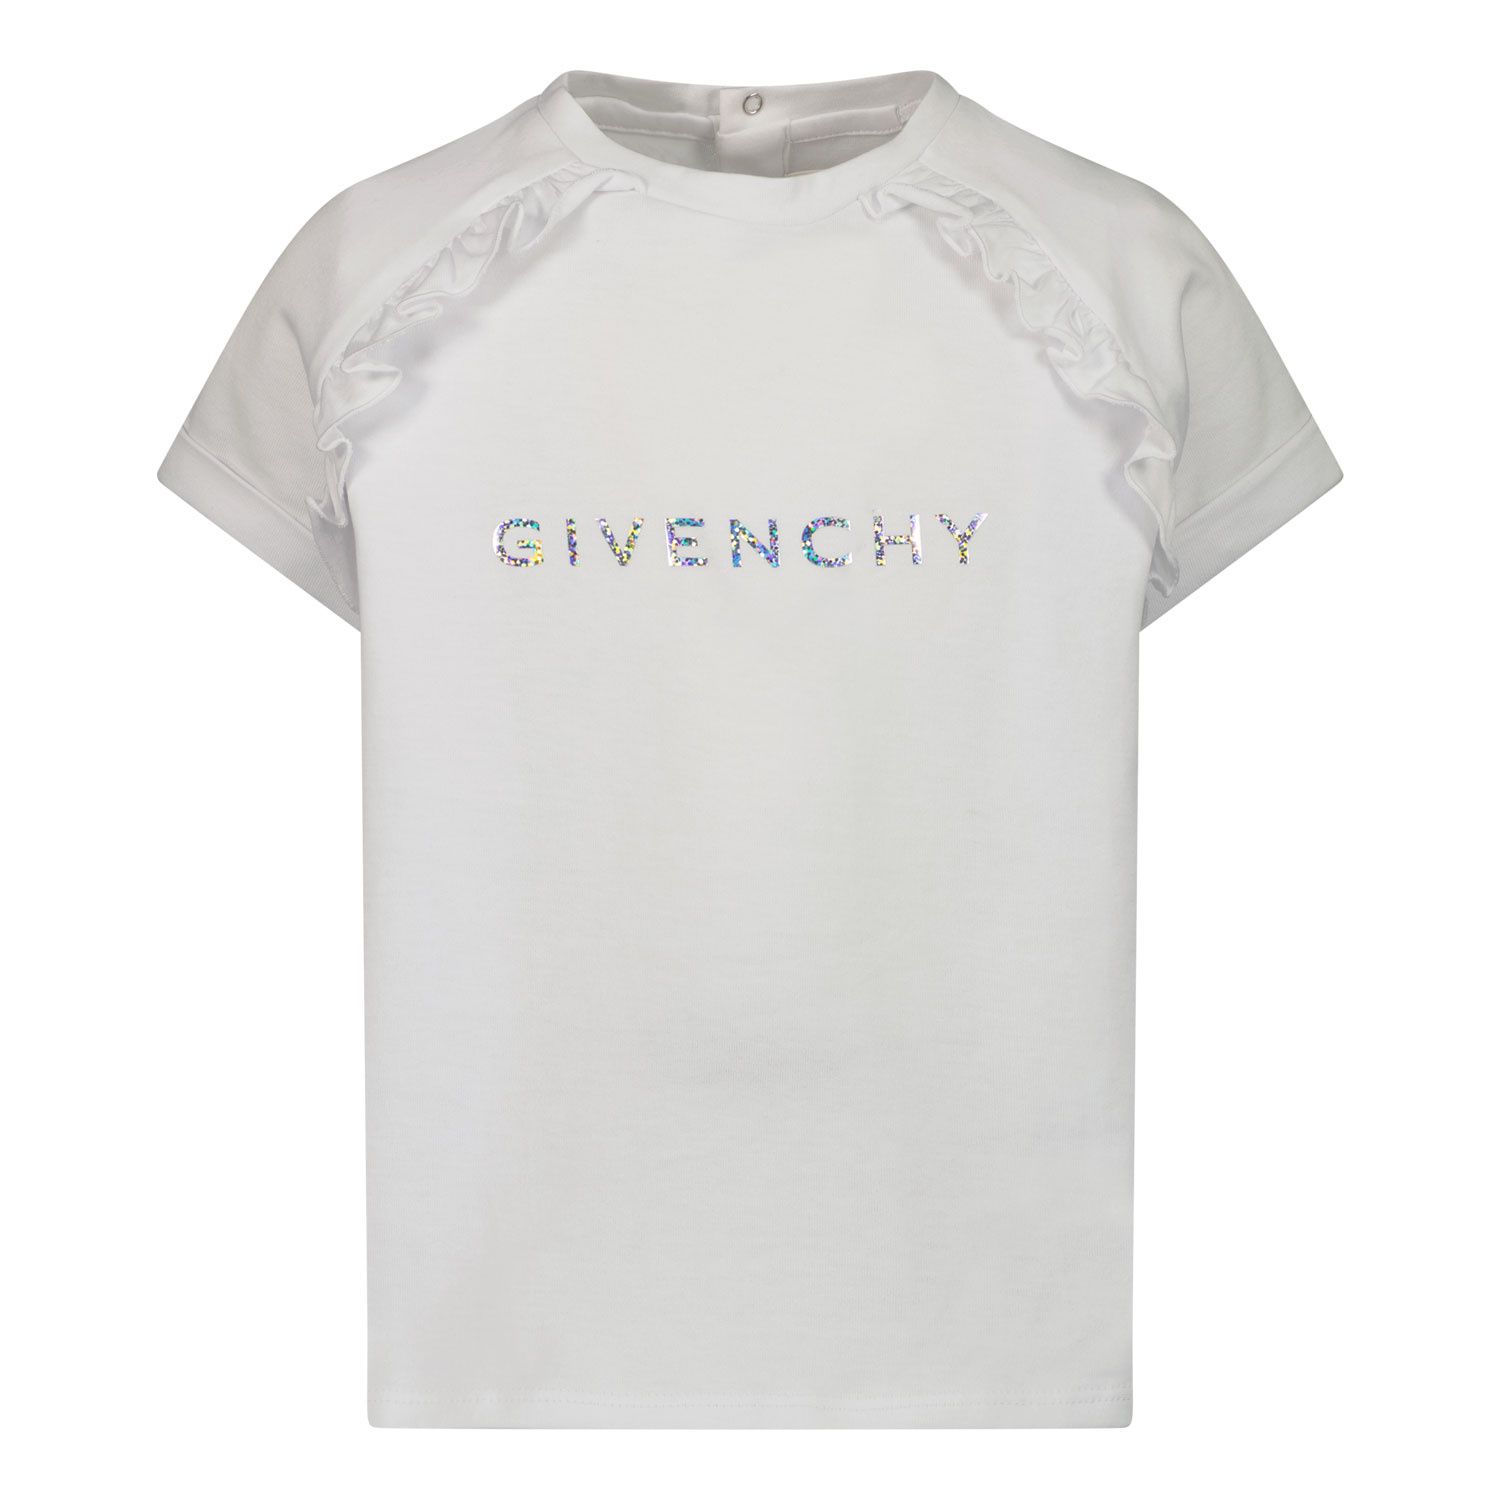 Picture of Givenchy H05211 baby shirt white